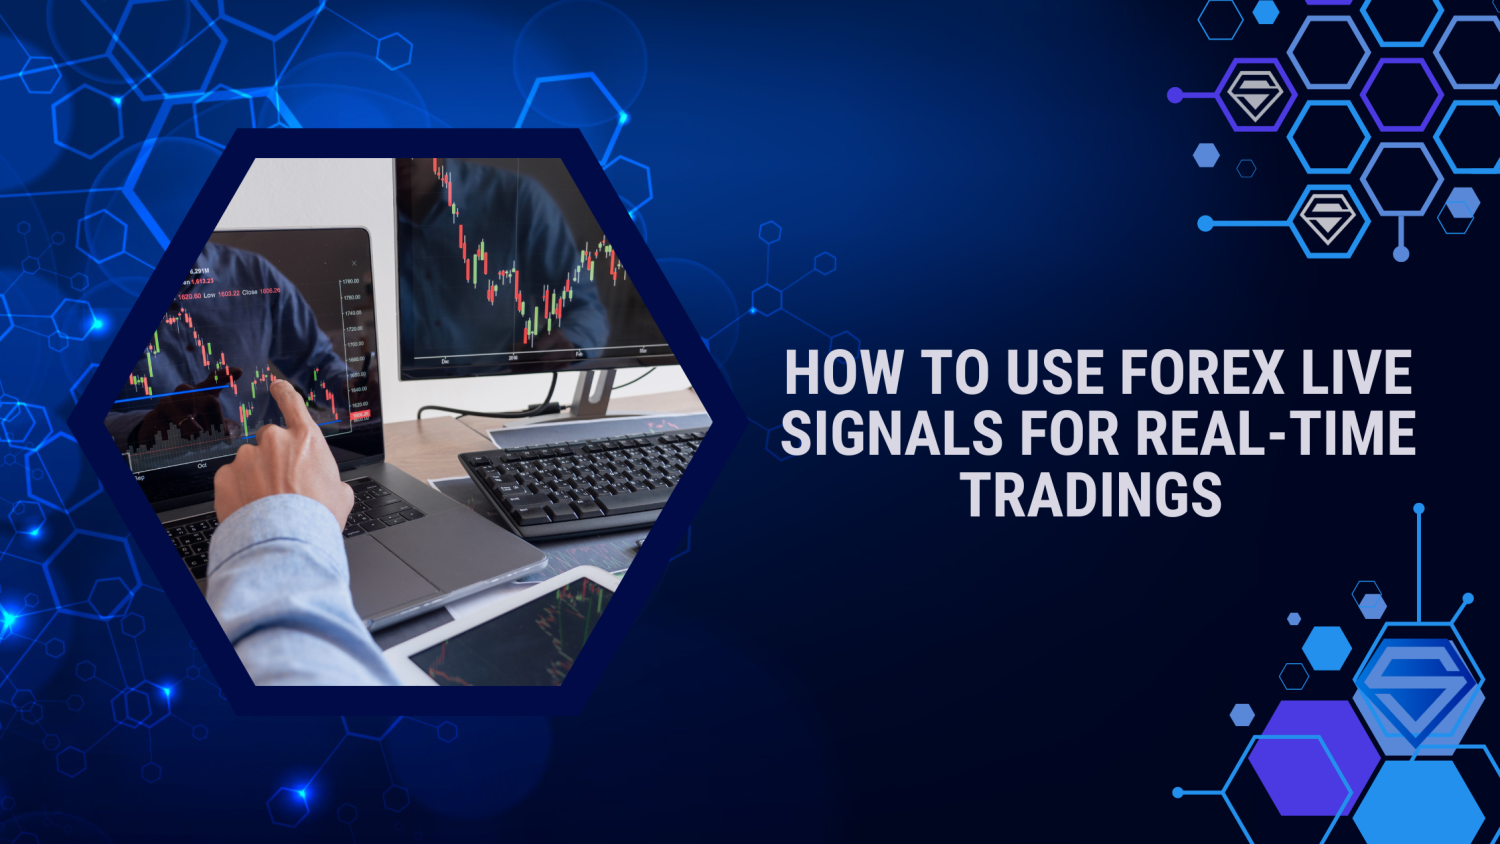 How to Use Forex Live Signals for Real-Time Trading